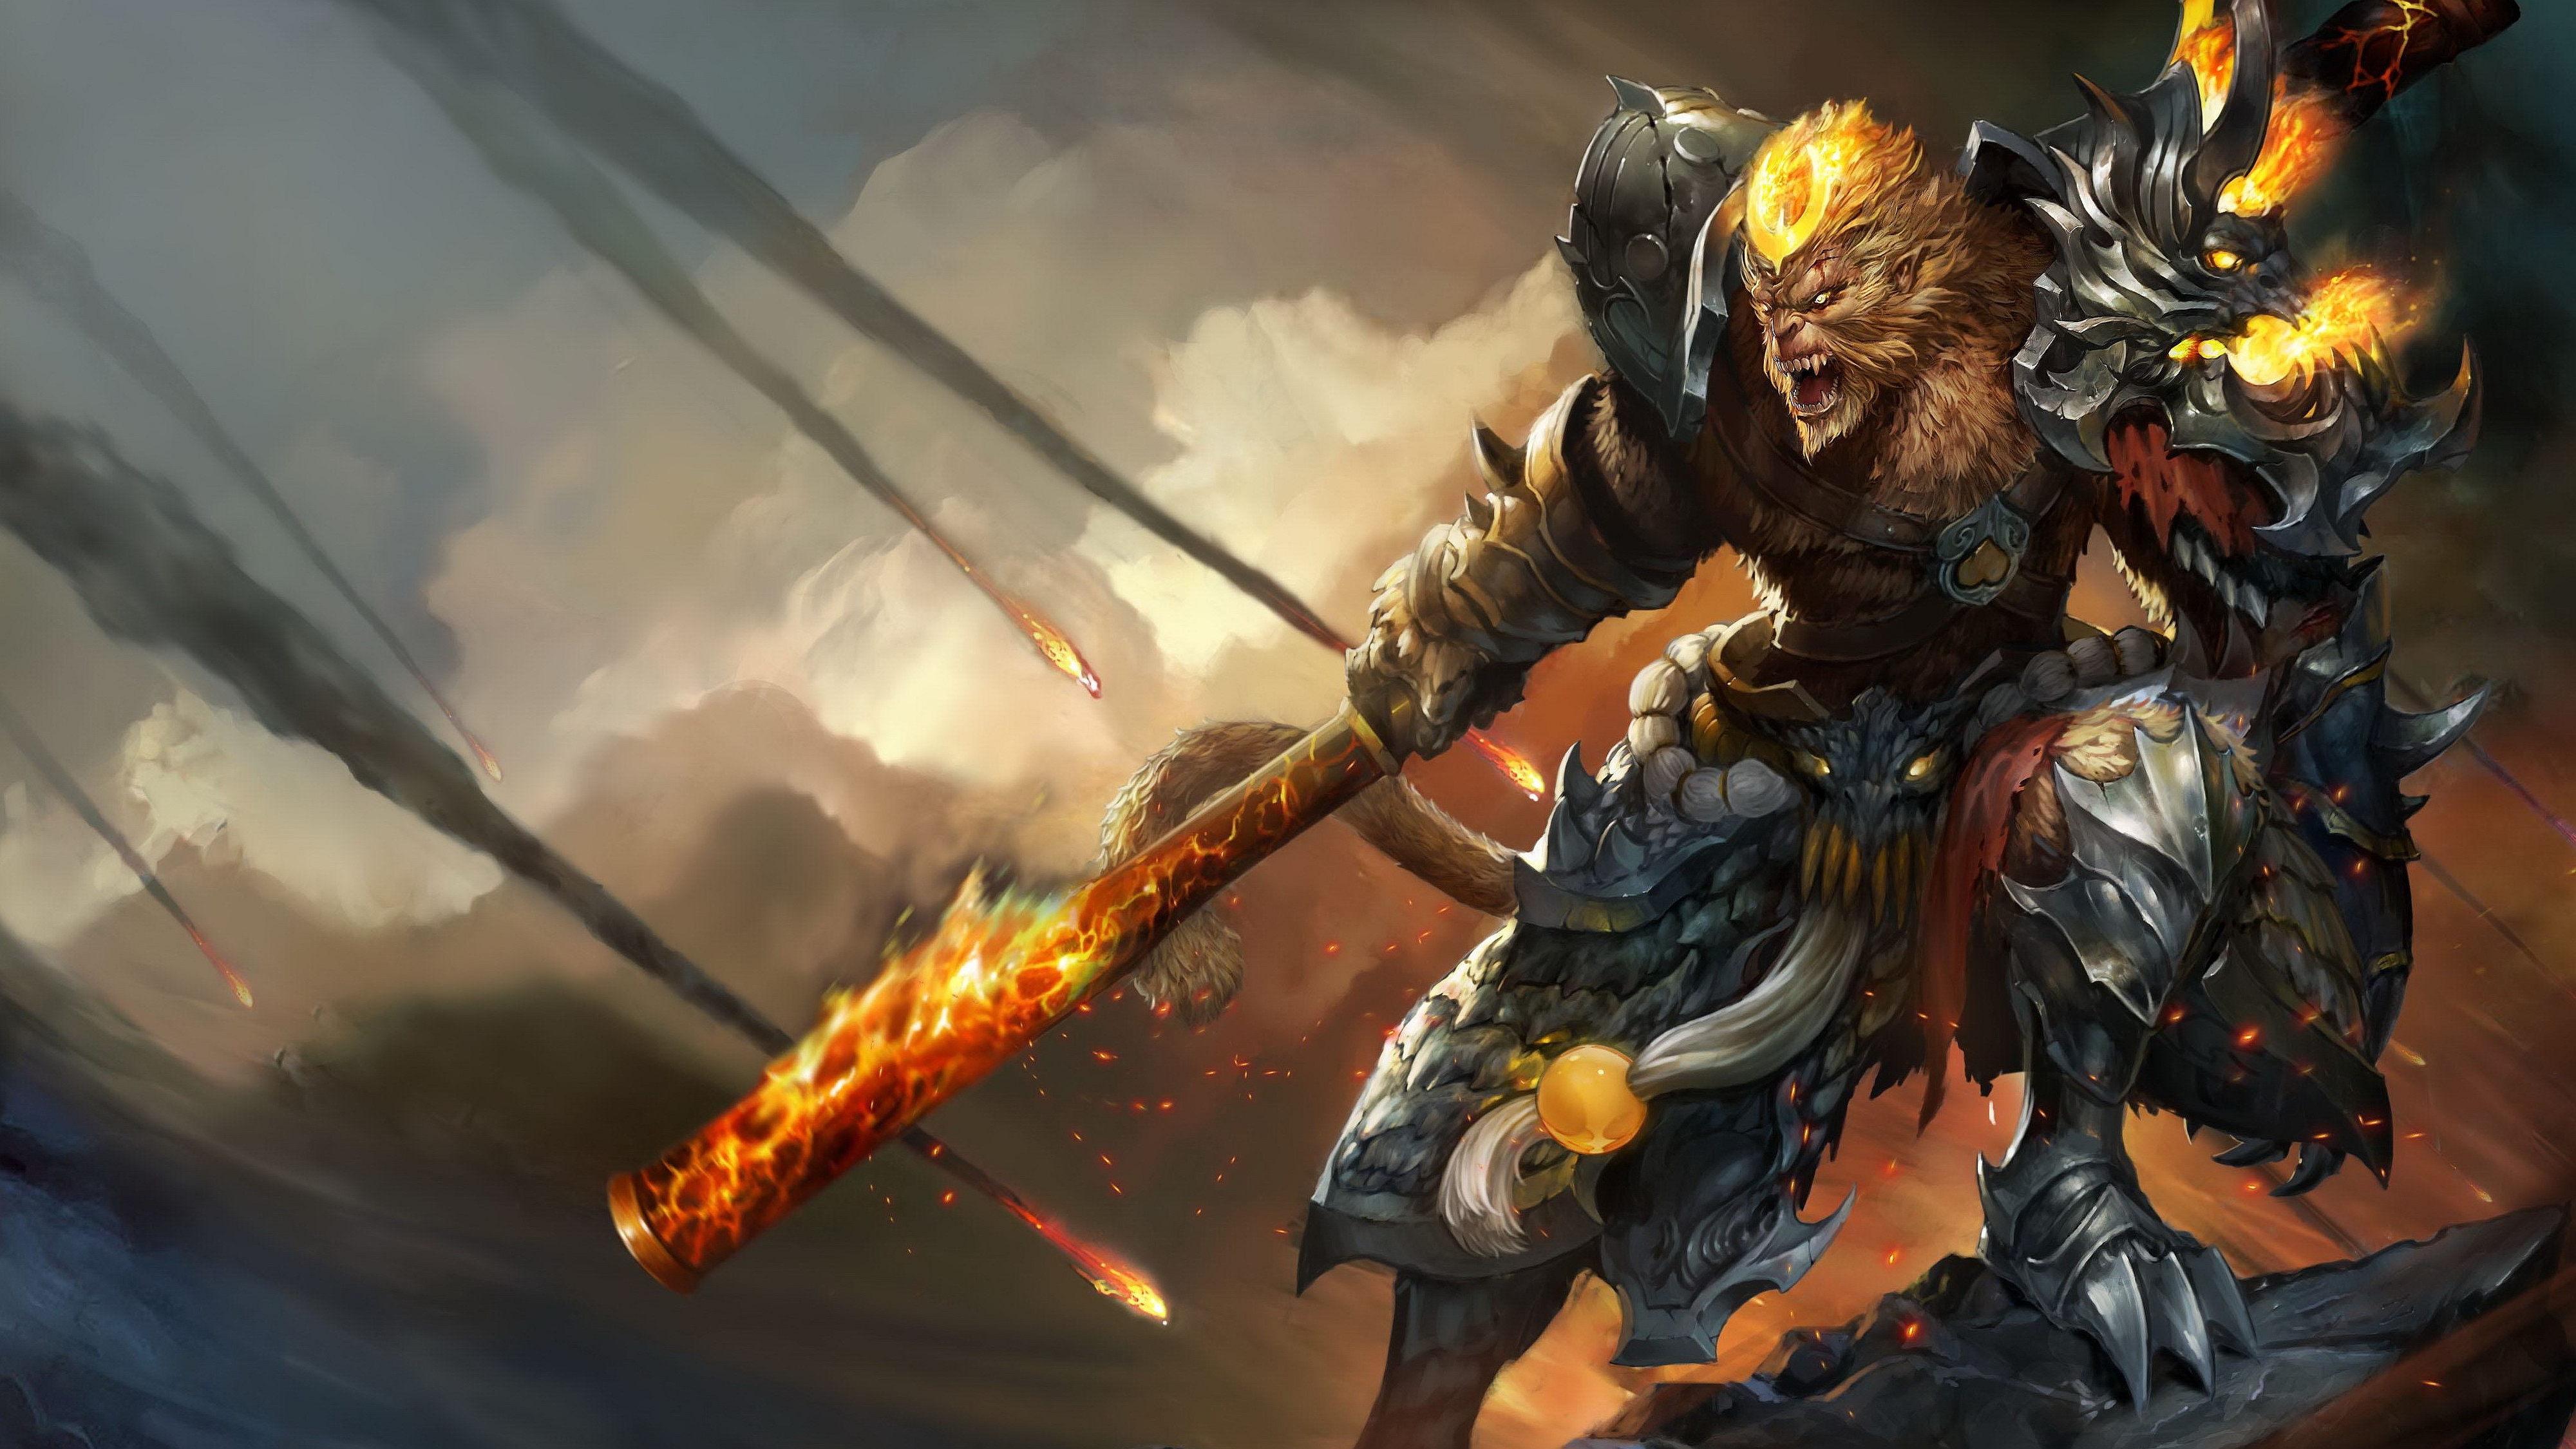 mobile legend wallpaper,action adventure game,pc game,cg artwork,games,warlord